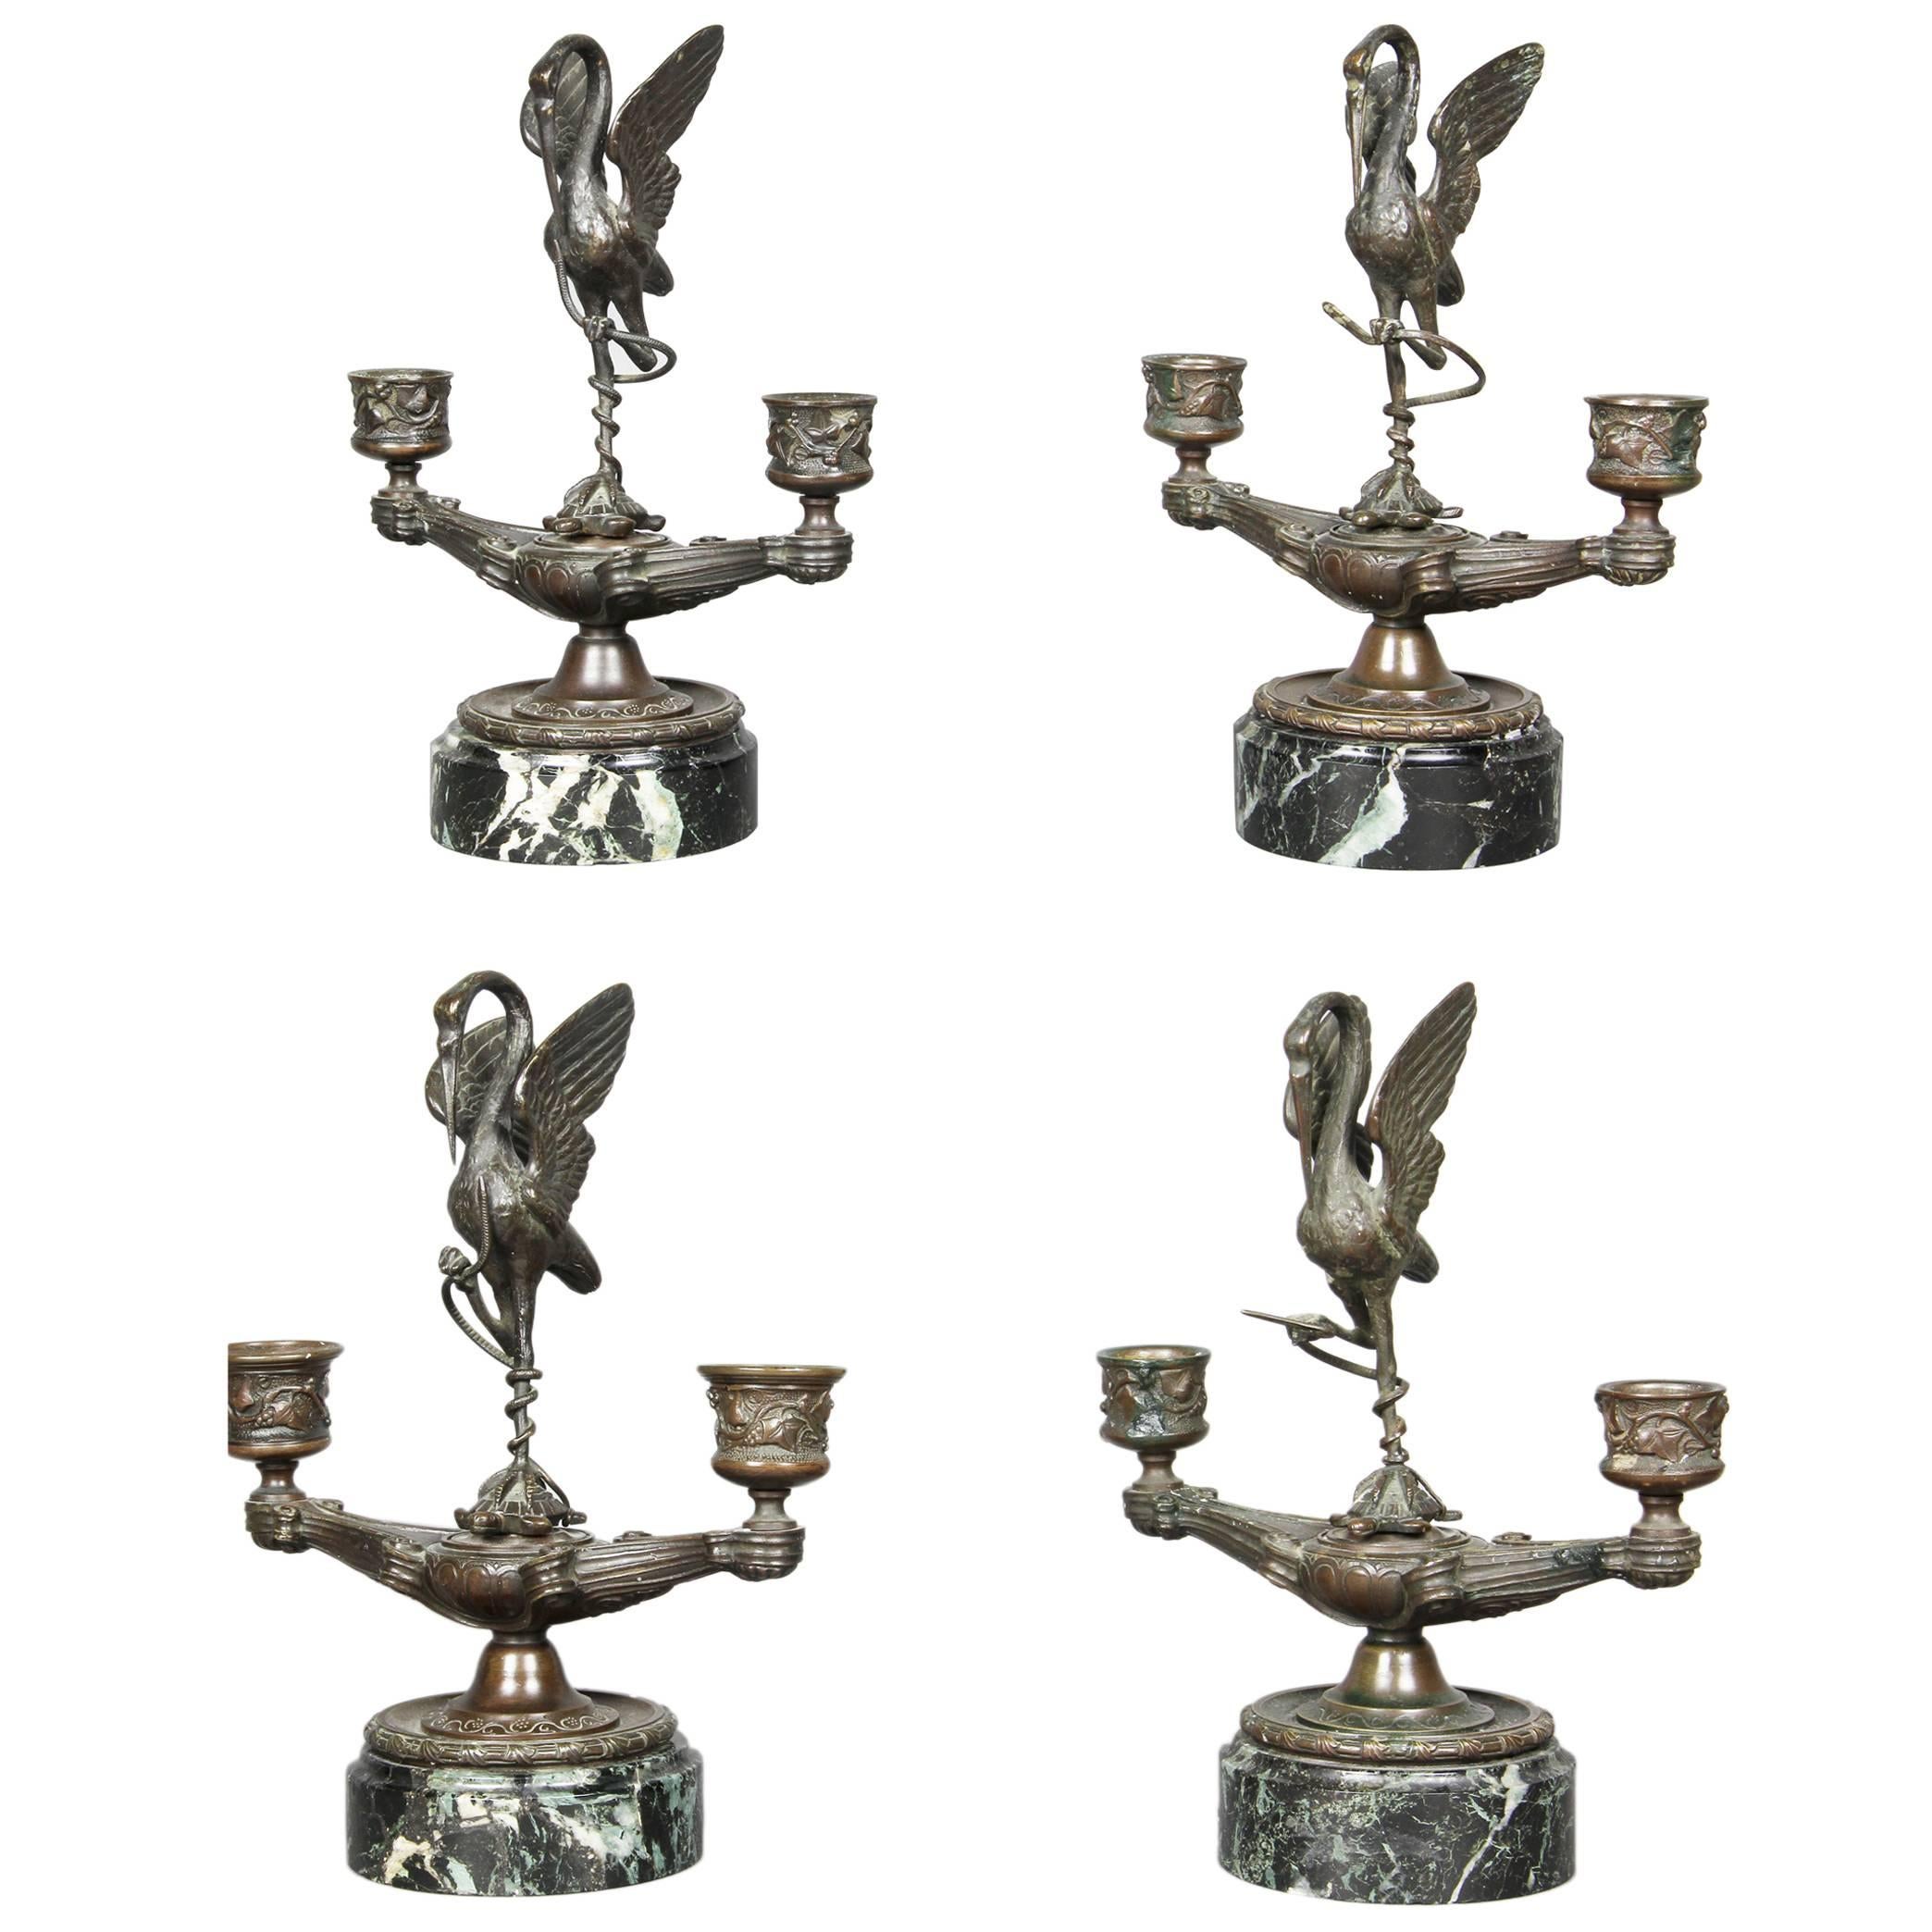 Set of Four Etruscan Revival Bronze and Marble Candlesticks